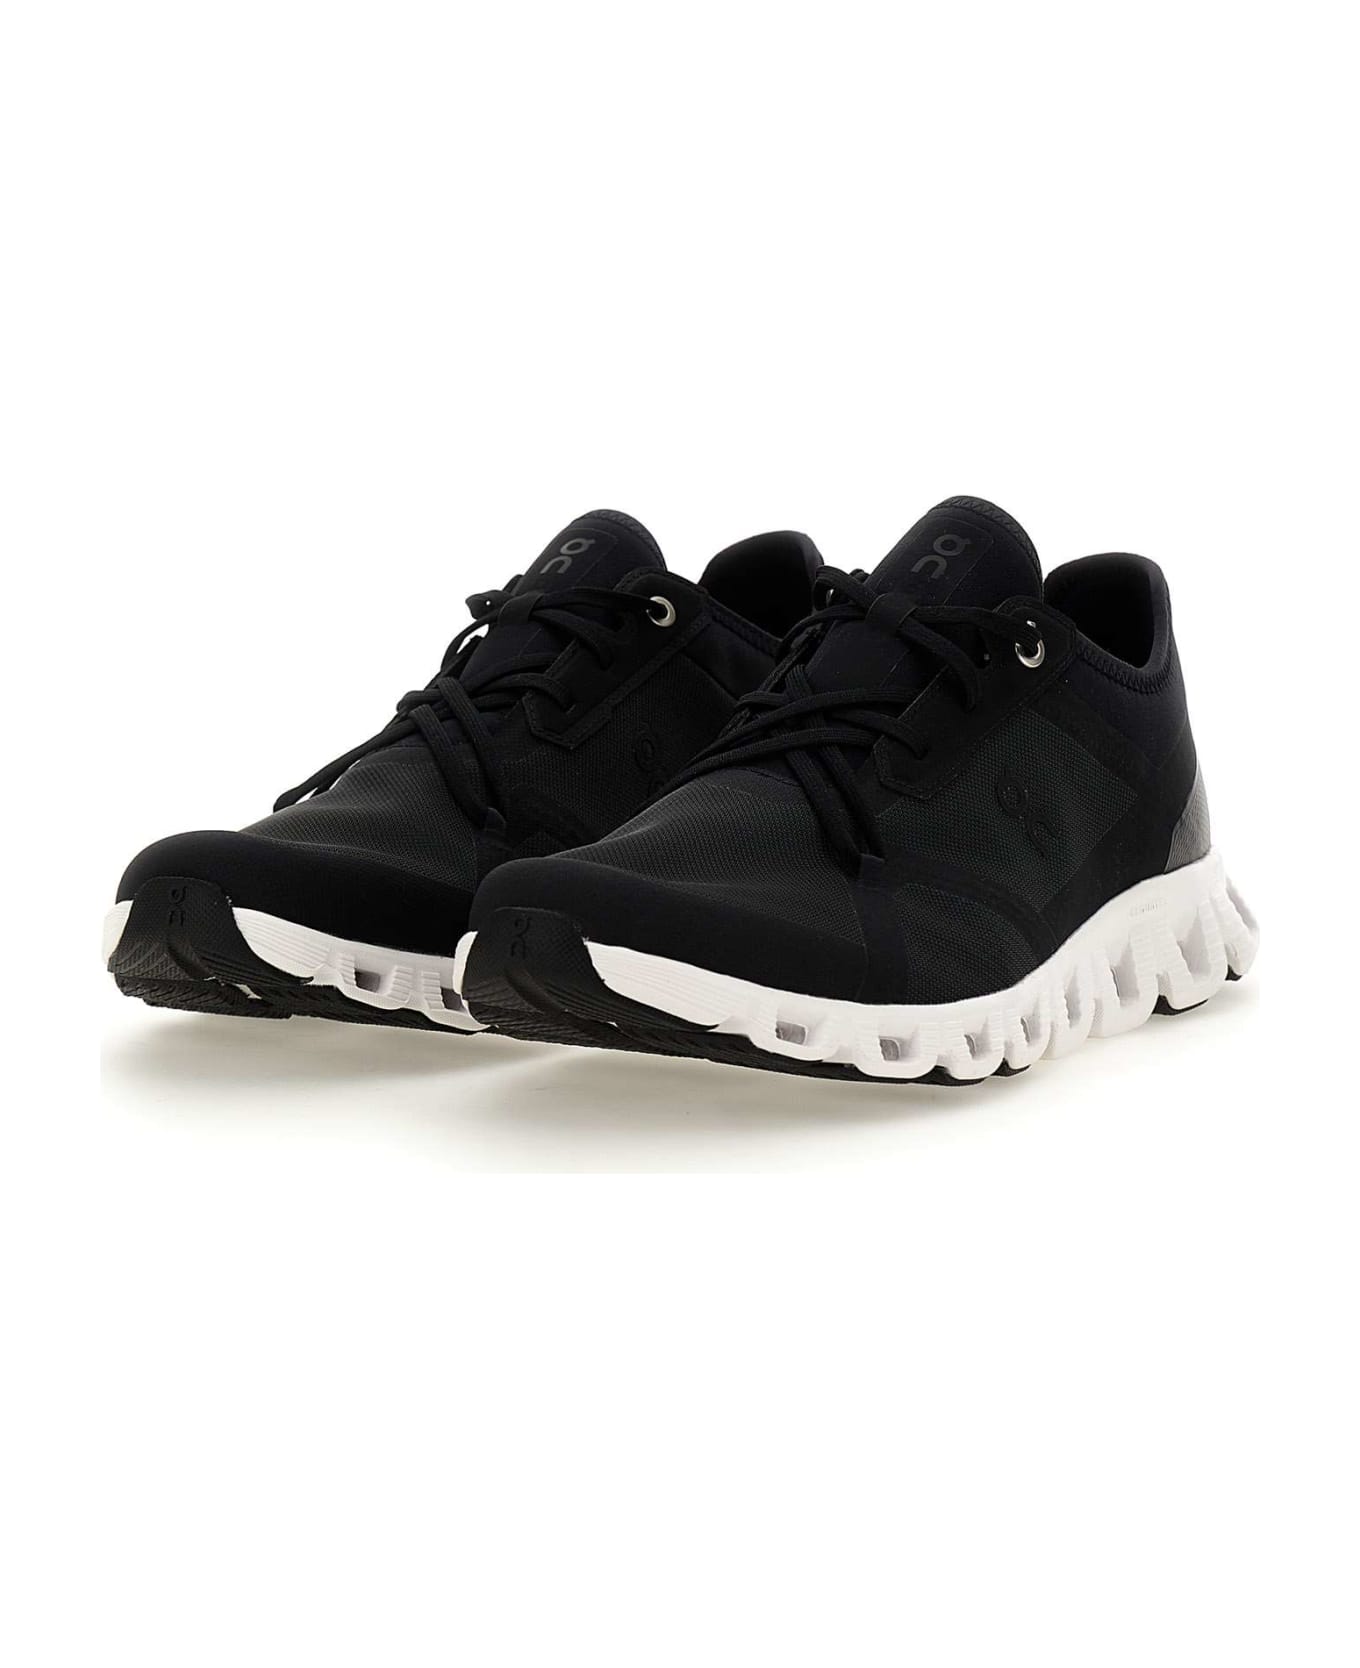 ON "cloud 3ad" Sneakers - BLACK-WHITE スニーカー